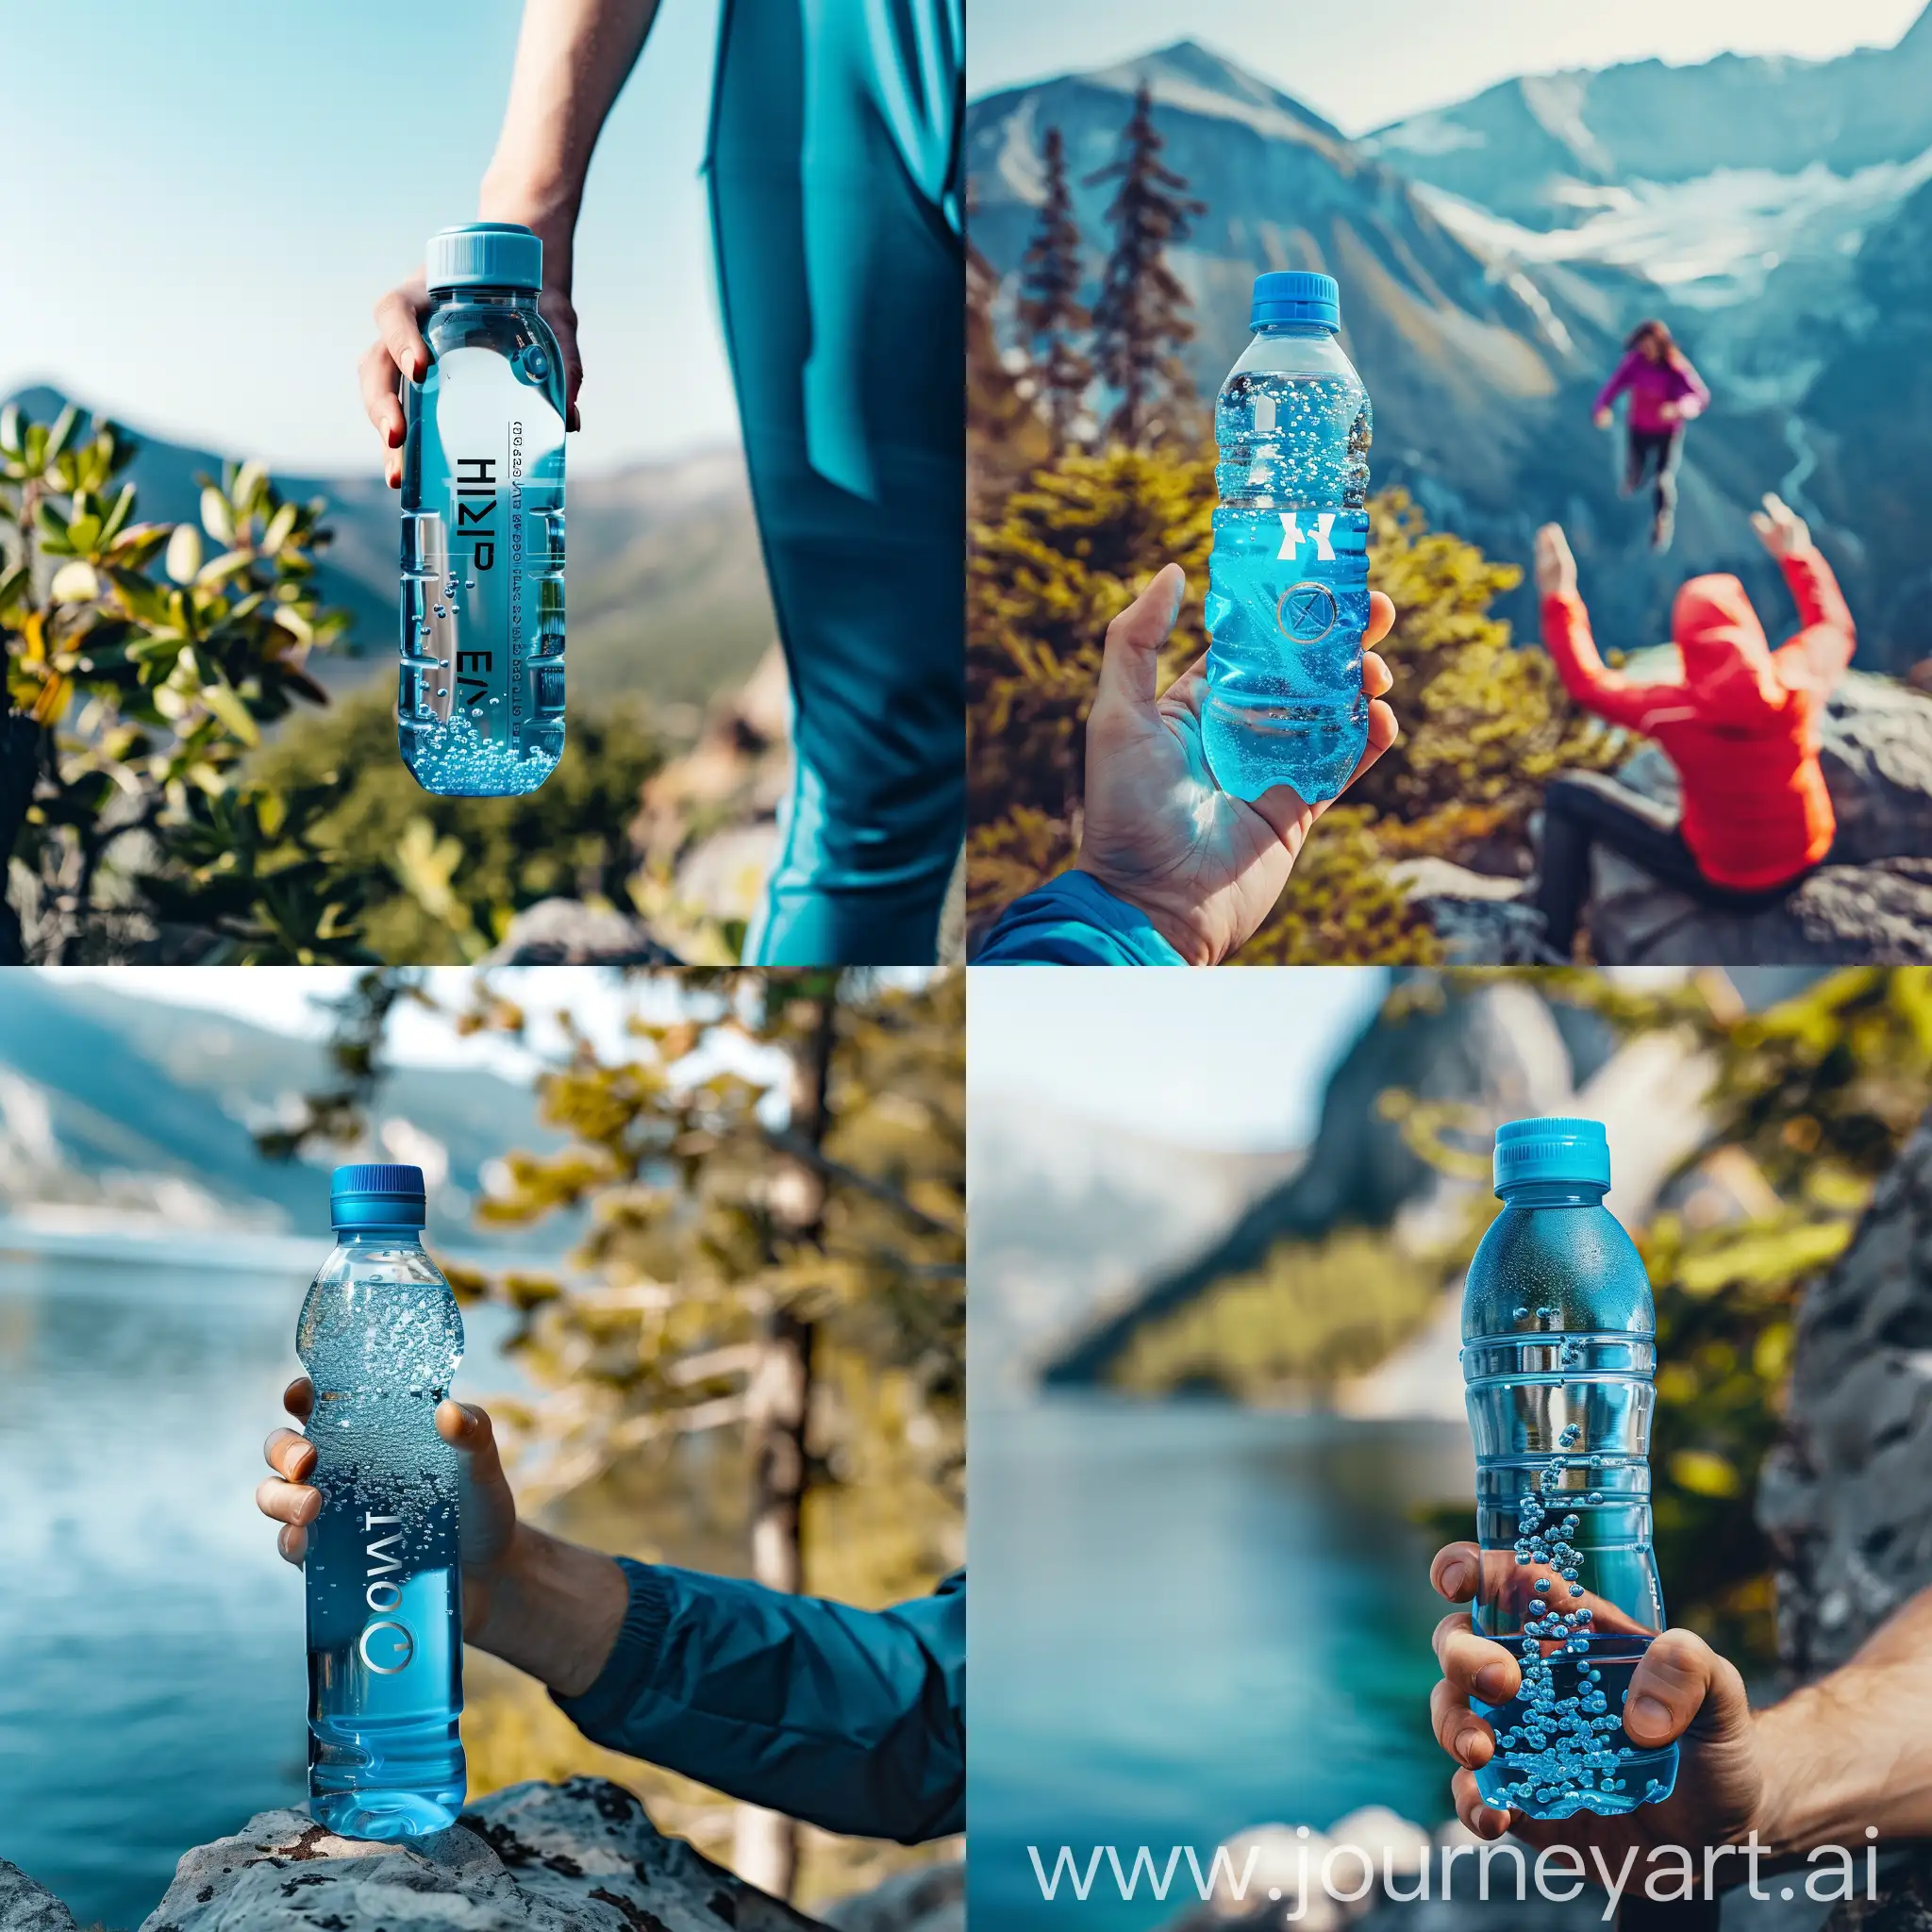 An image of someone holding the hydrogen water bottle while enjoying outdoor activities. Style: Energetic, vibrant. Keywords: Hydration, vitality, adventure. Camera: DSLR. Lens: Standard zoom. Post-processing: Vibrancy enhancement.